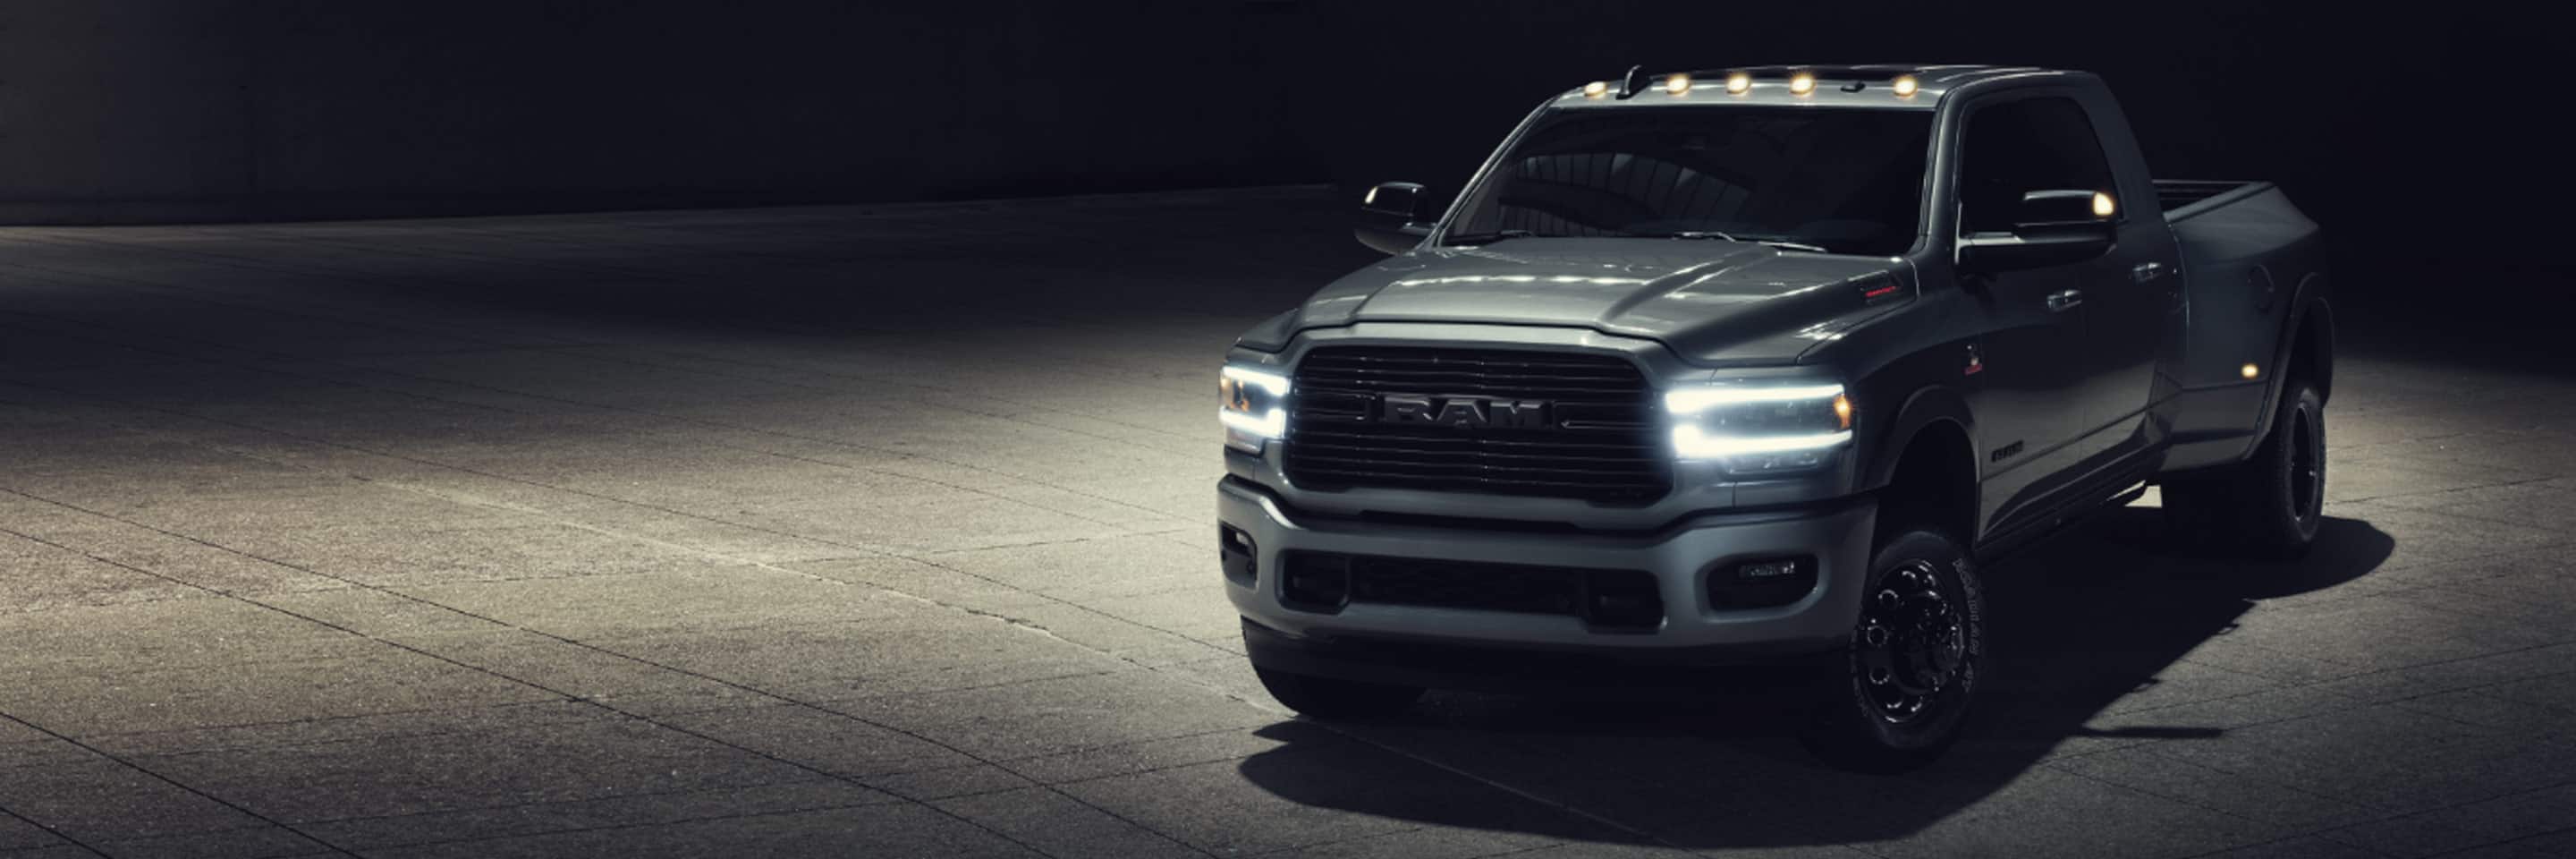 The 2022 Ram 3500 at night with headlamps and Ram Bar lit.